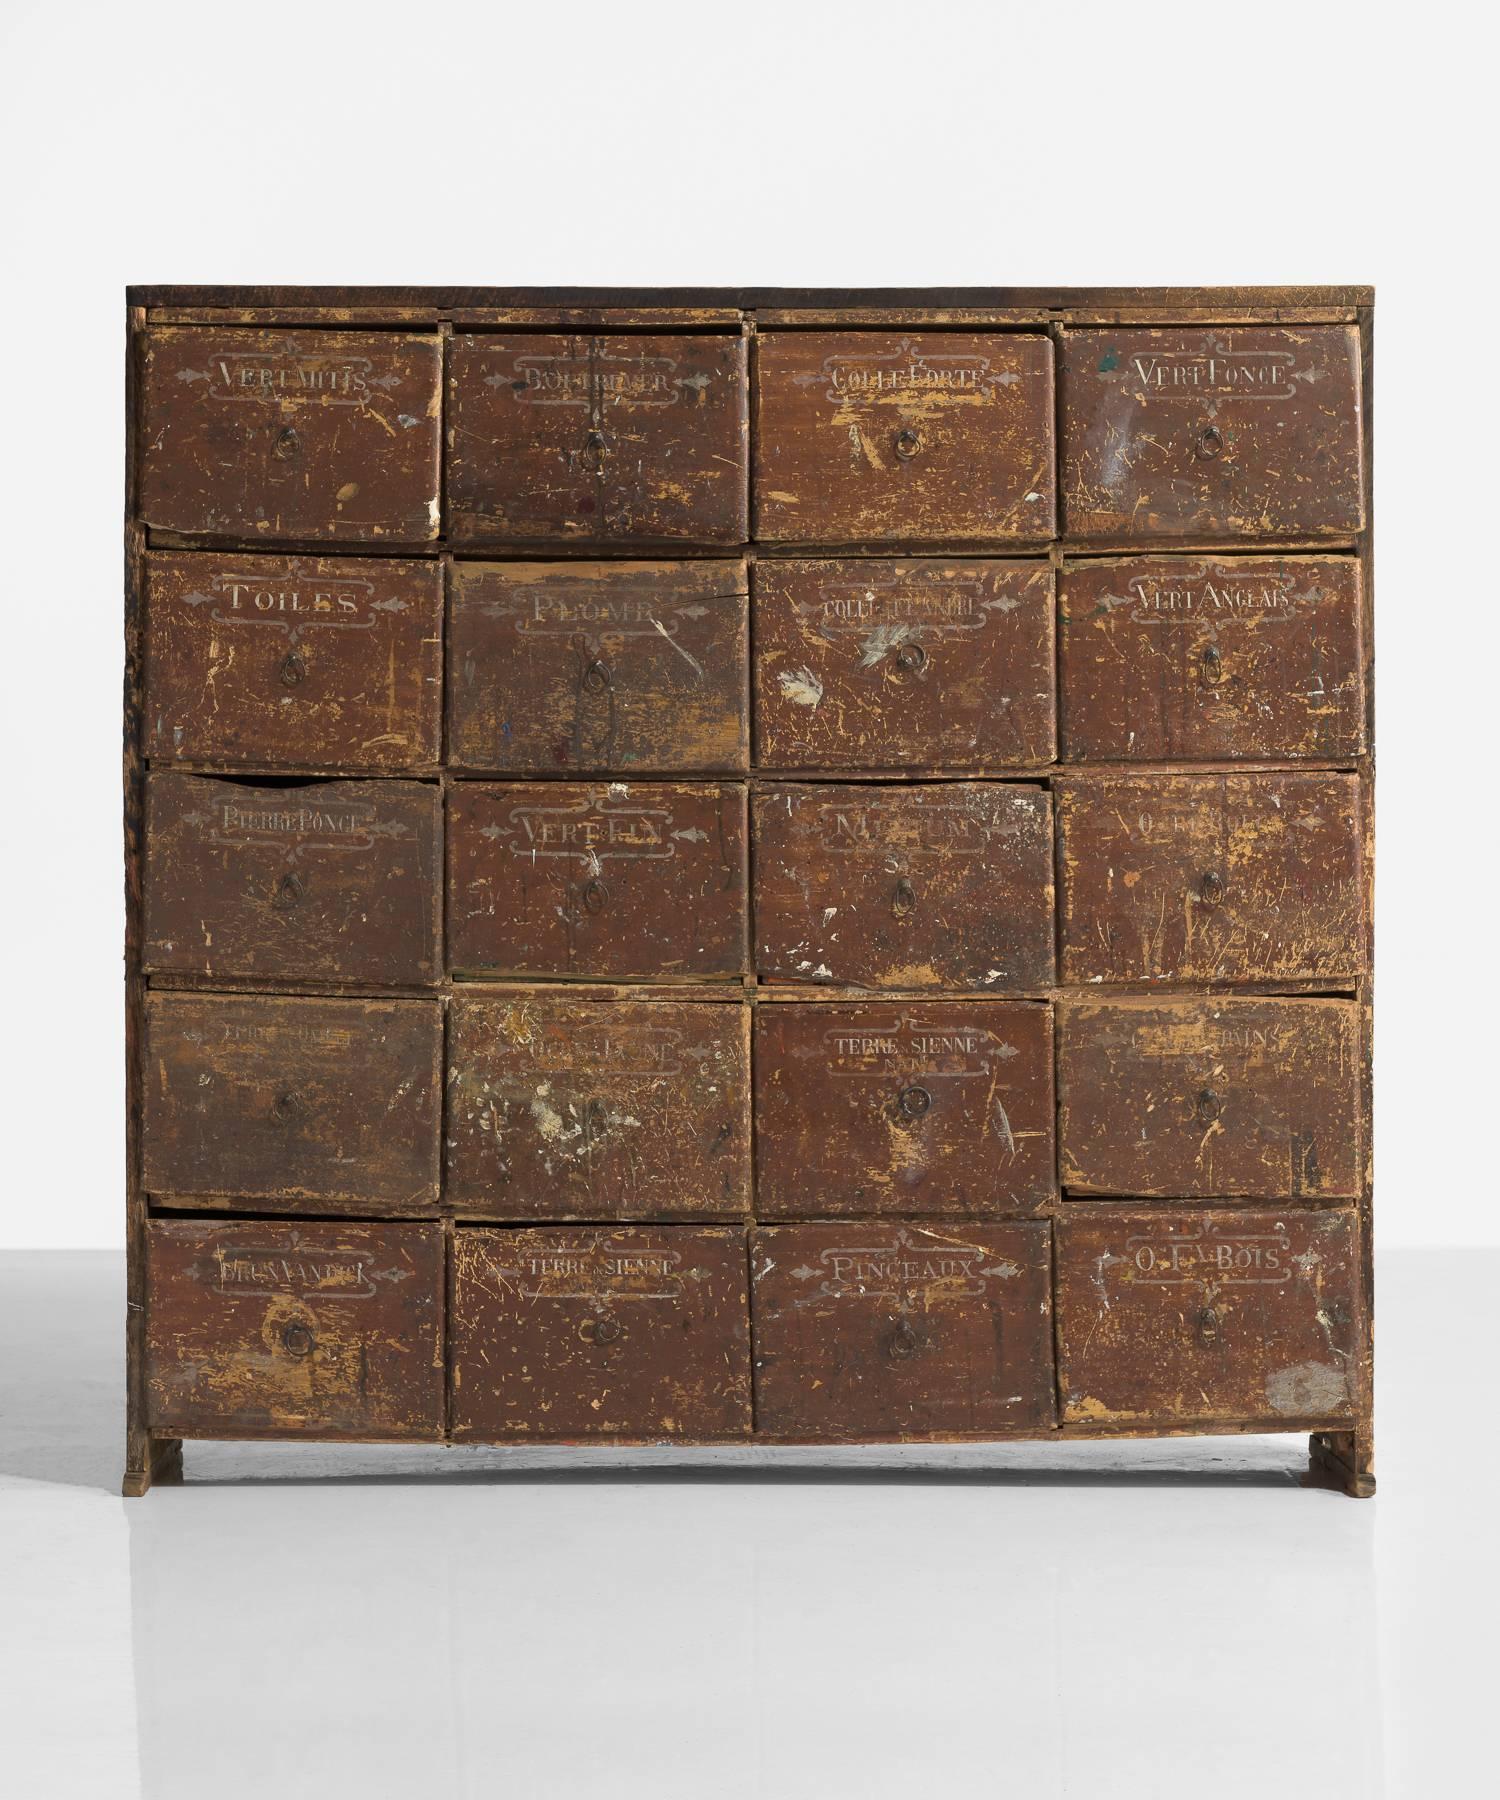 Artist pigment drawers, France, circa 1820.

Heavily patinated pine chest of drawers originally used for paint pigments includes drawers with hand-lettered labels.